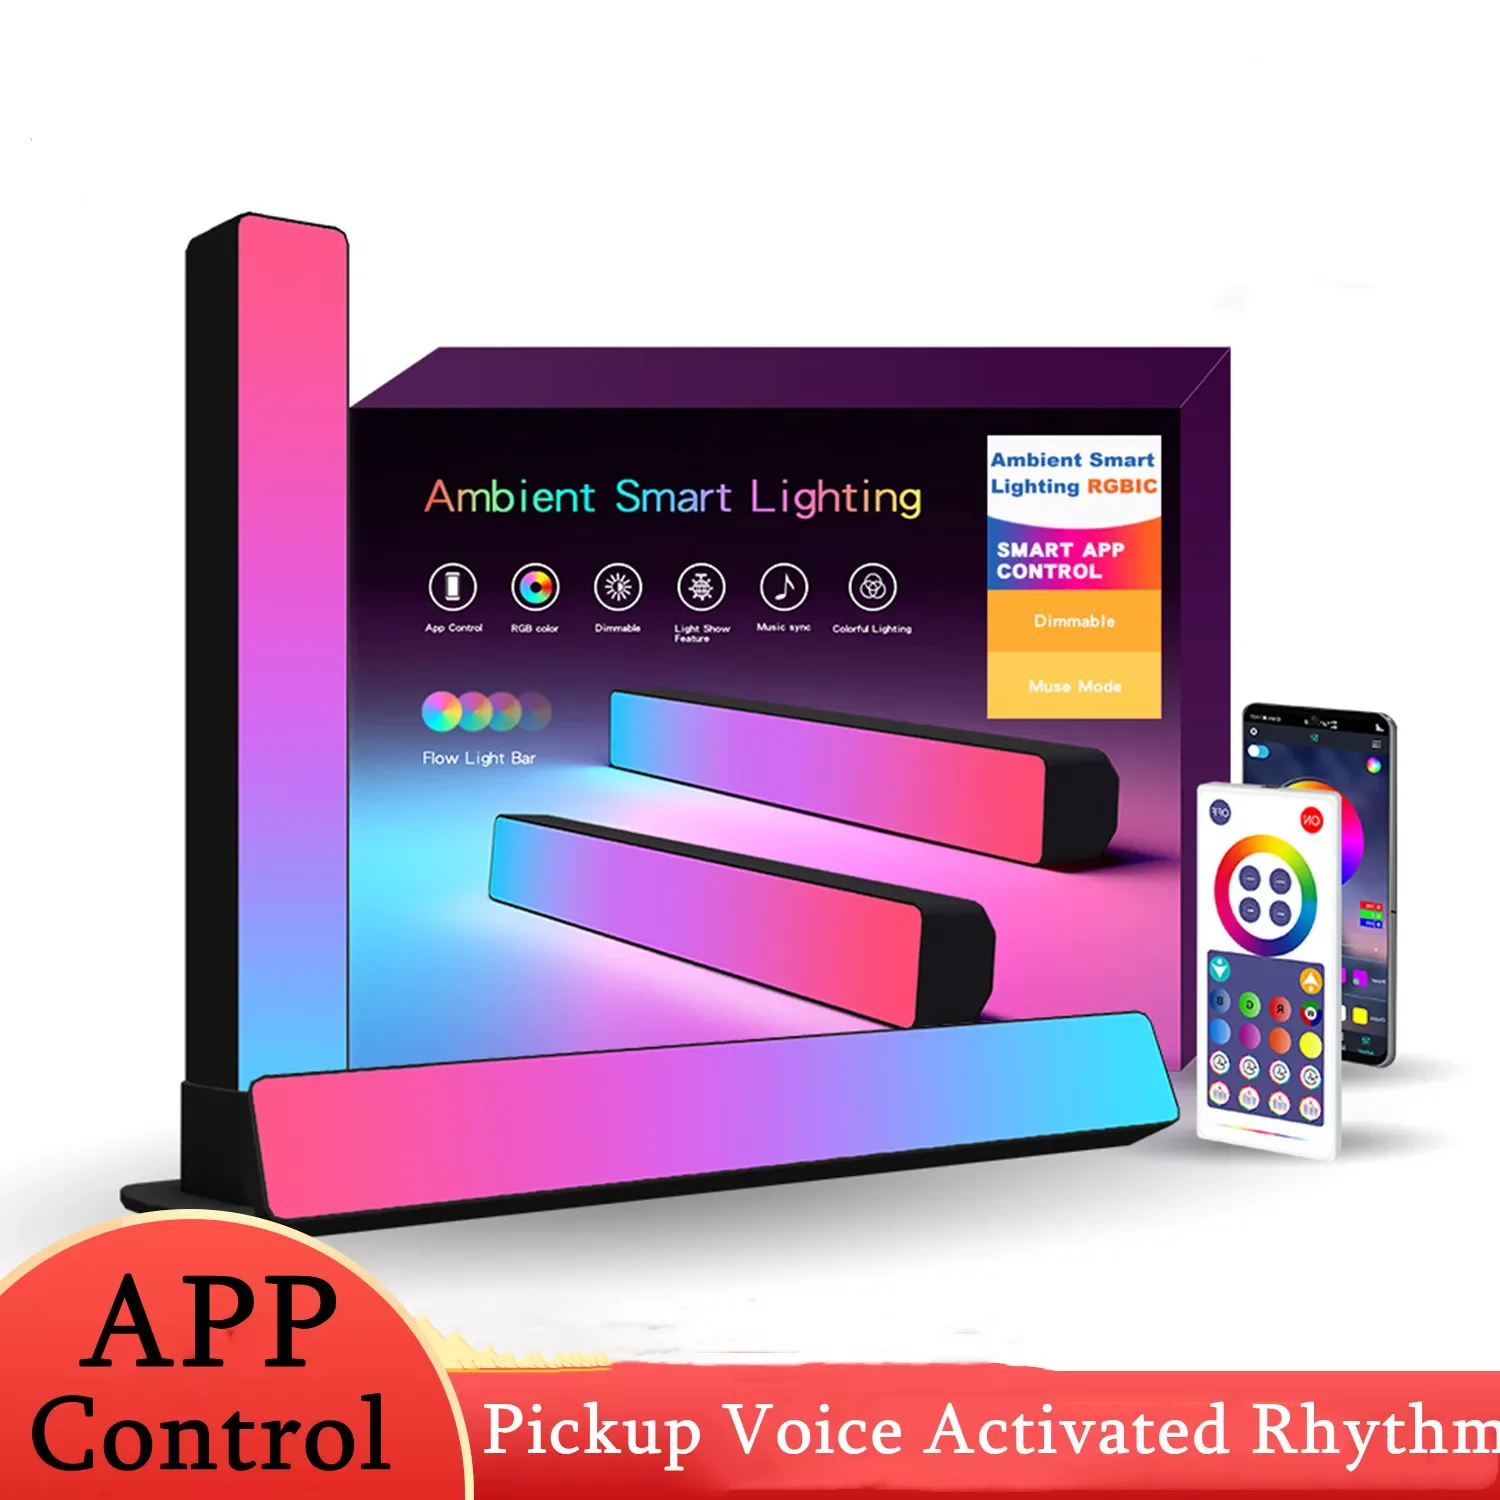 Pair 2022 RGB Music Sound control APP LED light Pickup Voice Activated Rhythm Lights color Ambient LED Bar Party Deco Lights